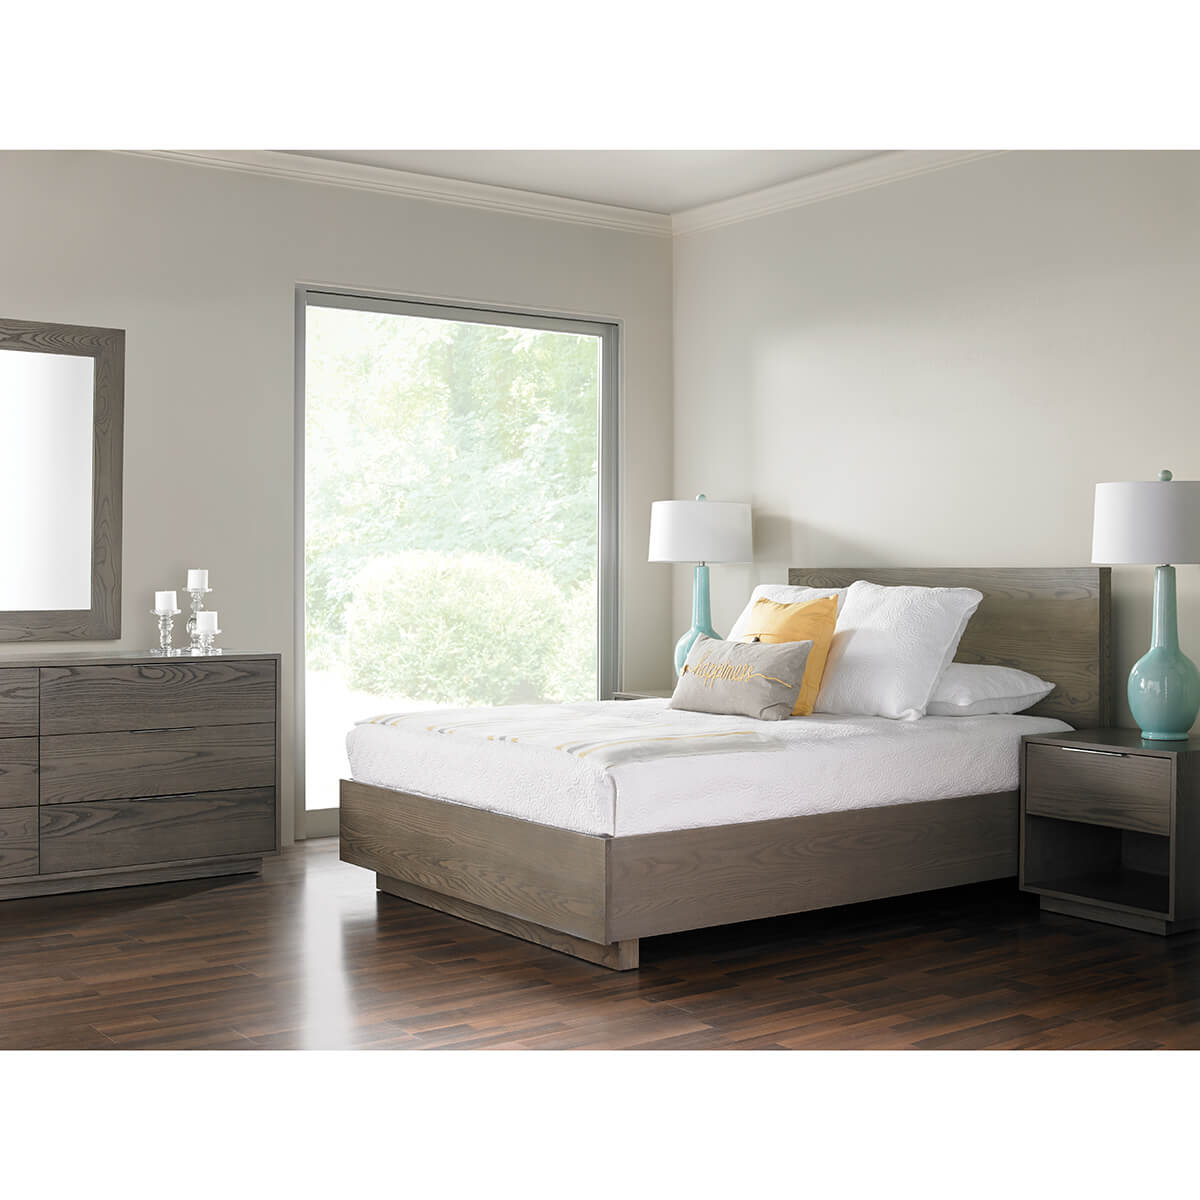 Read more about the article Tara Ash Bedroom Collection